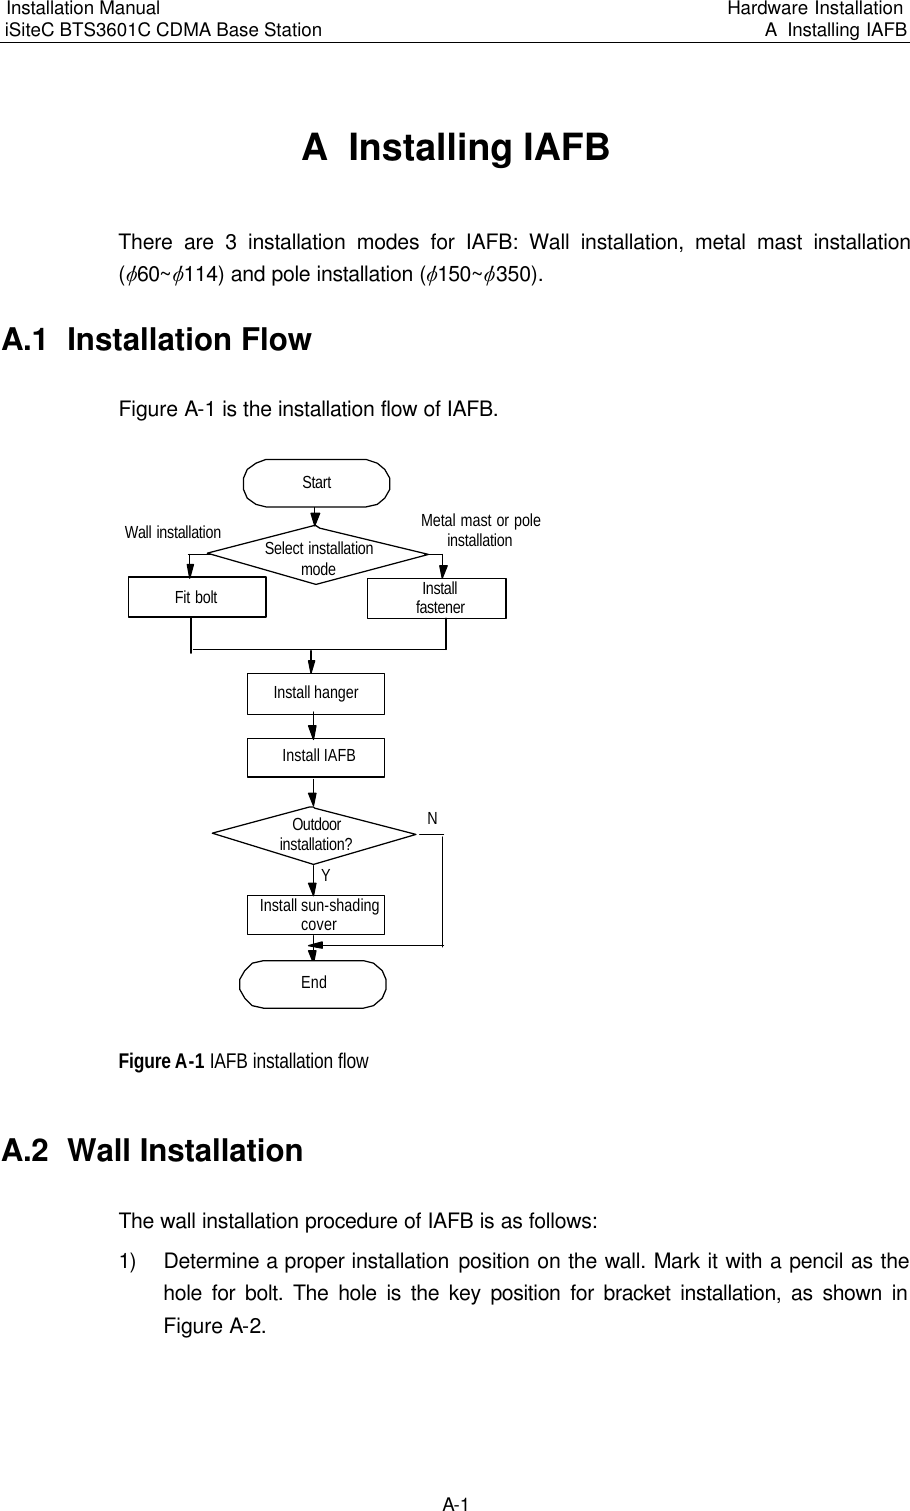 Installation Manual   iSiteC BTS3601C CDMA Base Station Hardware Installation A  Installing IAFB  A-1 A  Installing IAFB There are 3 installation modes for IAFB: Wall installation, metal mast installation (v60~v114) and pole installation (v150~v350).　A.1  Installation Flow　Figure A-1 is the installation flow of IAFB.　Install IAFBInstall sun-shadingcoverWall installation Metal mast or poleinstallationInstallfastenerFit boltInstall hangerOutdoorinstallation?YNSelect installationmodeStartEnd 　Figure A-1 IAFB installation flow　A.2  Wall Installation　The wall installation procedure of IAFB is as follows:　1) Determine a proper installation position on the wall. Mark it with a pencil as the hole for bolt. The hole is the key position for bracket installation, as shown in Figure A-2.　